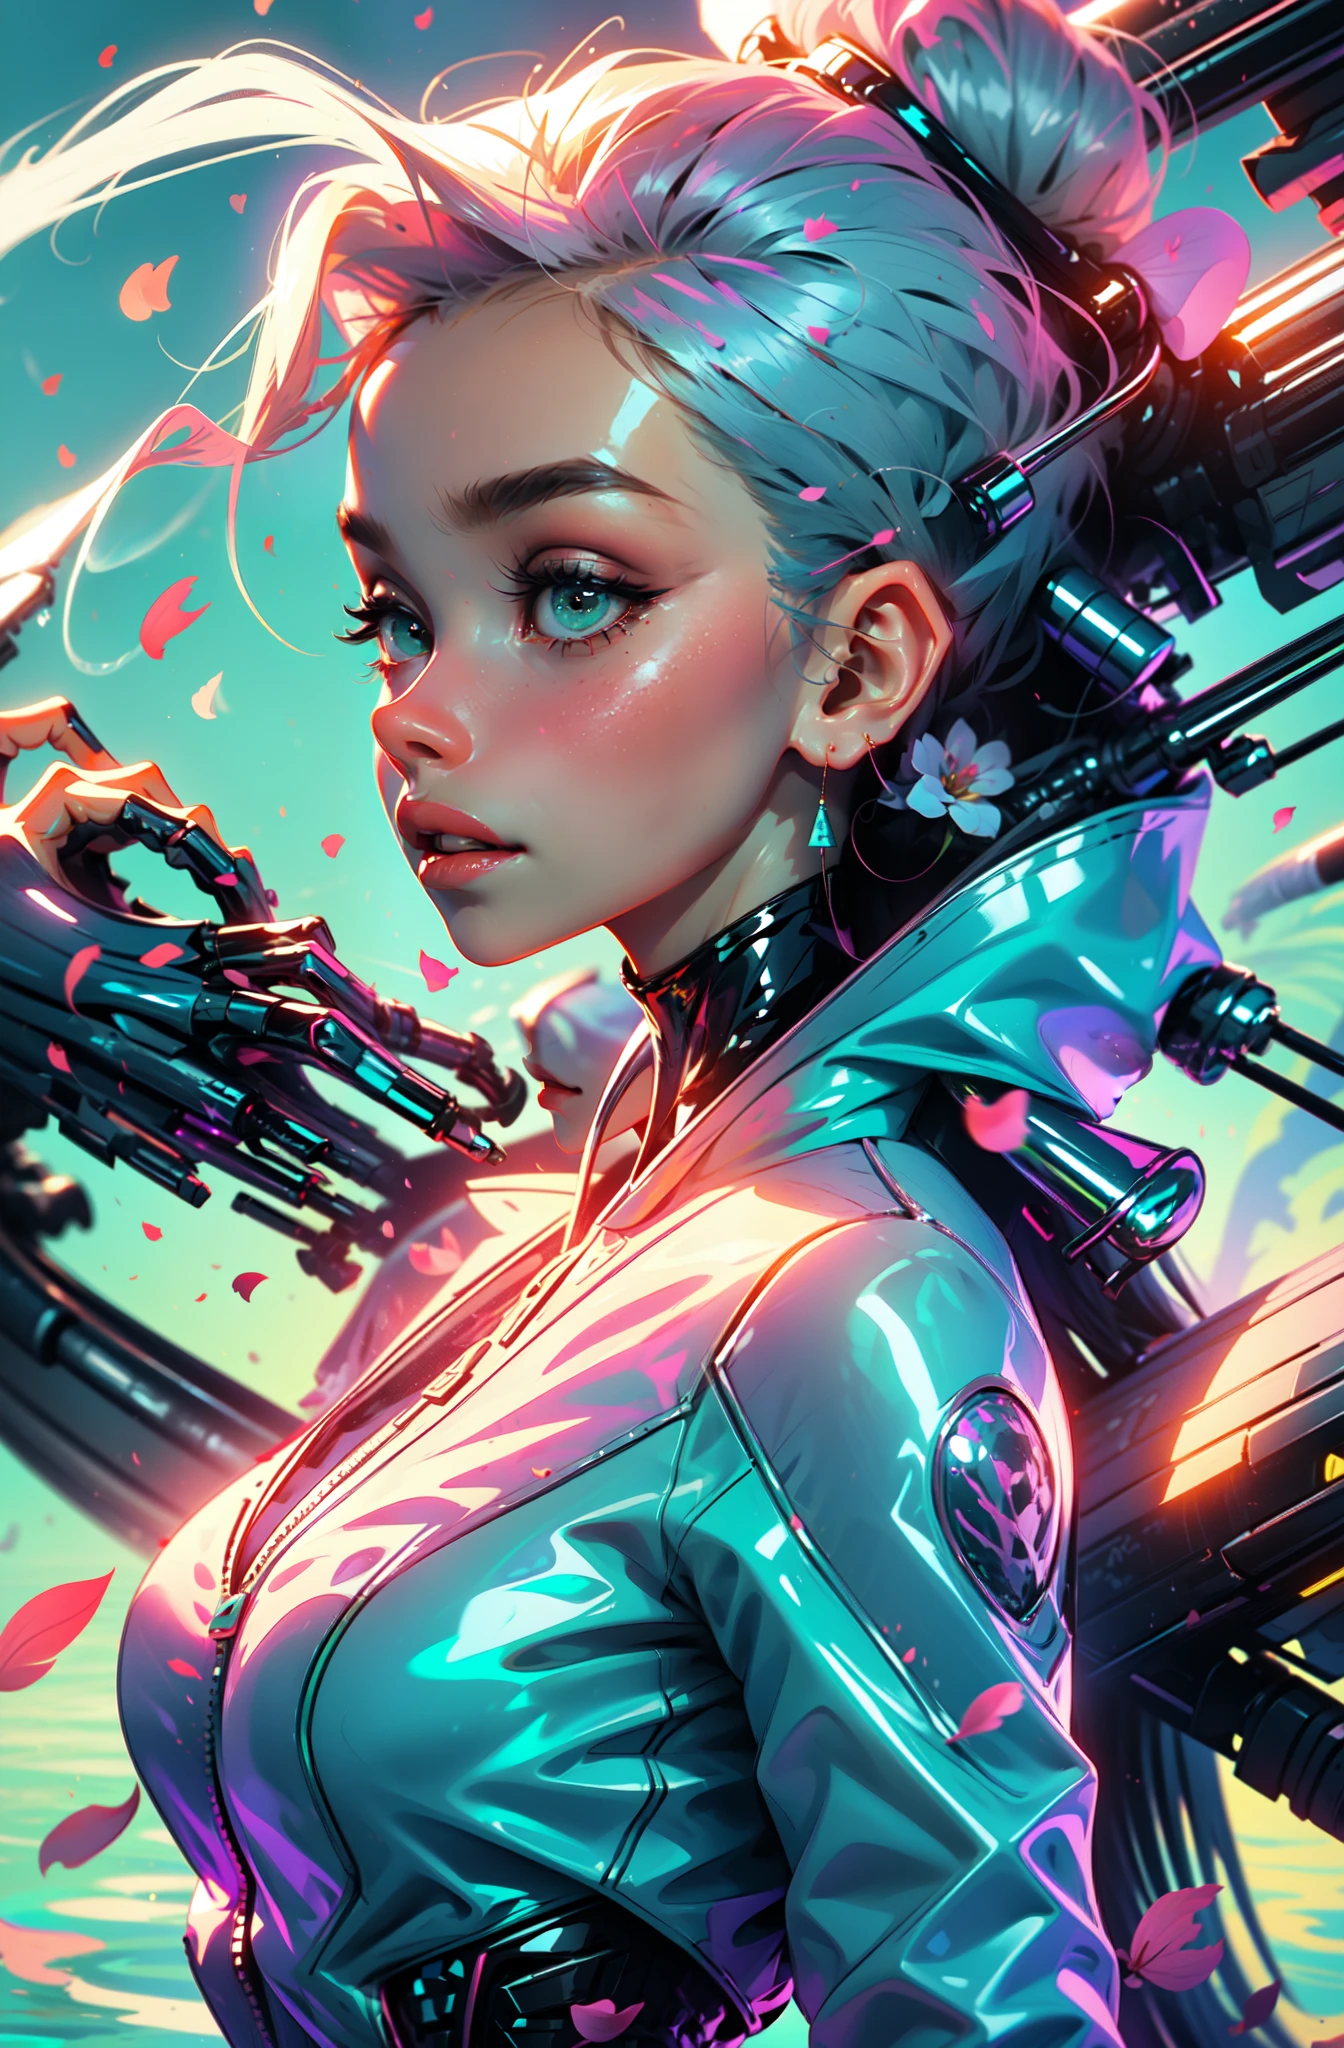 cyberpunk female woman wearing (turquoise Jacket with chromatic accents:1.1), sleek pink and White full bodysuit, side view turning to face camera, (Petal Blush, Lagoon Blue color background:1.3), amazing smile, looking at camera, golden hour